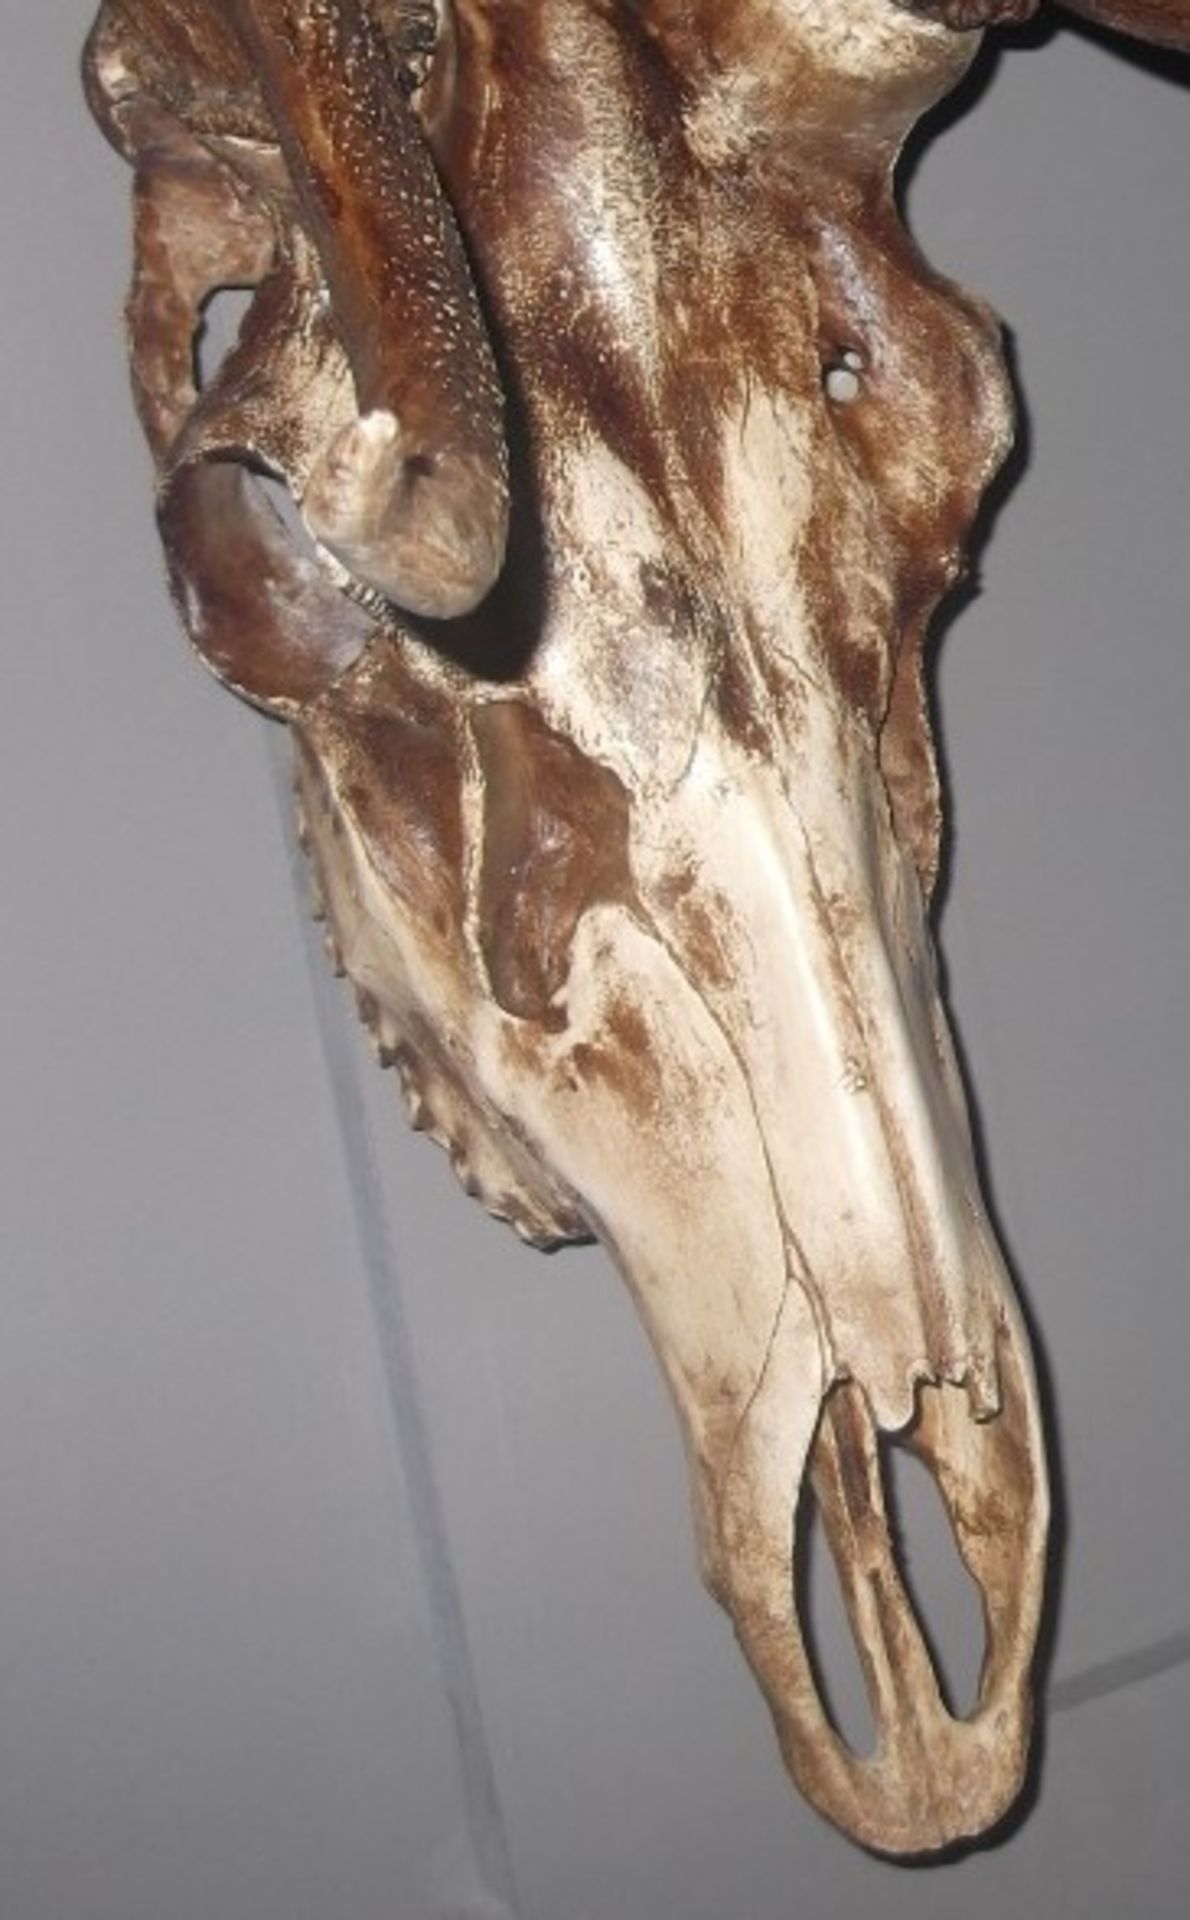 1 x Trophy Deer Skull Wall - Art Decoration - New / Unused Stock - Very Realistic Faux - Image 4 of 4